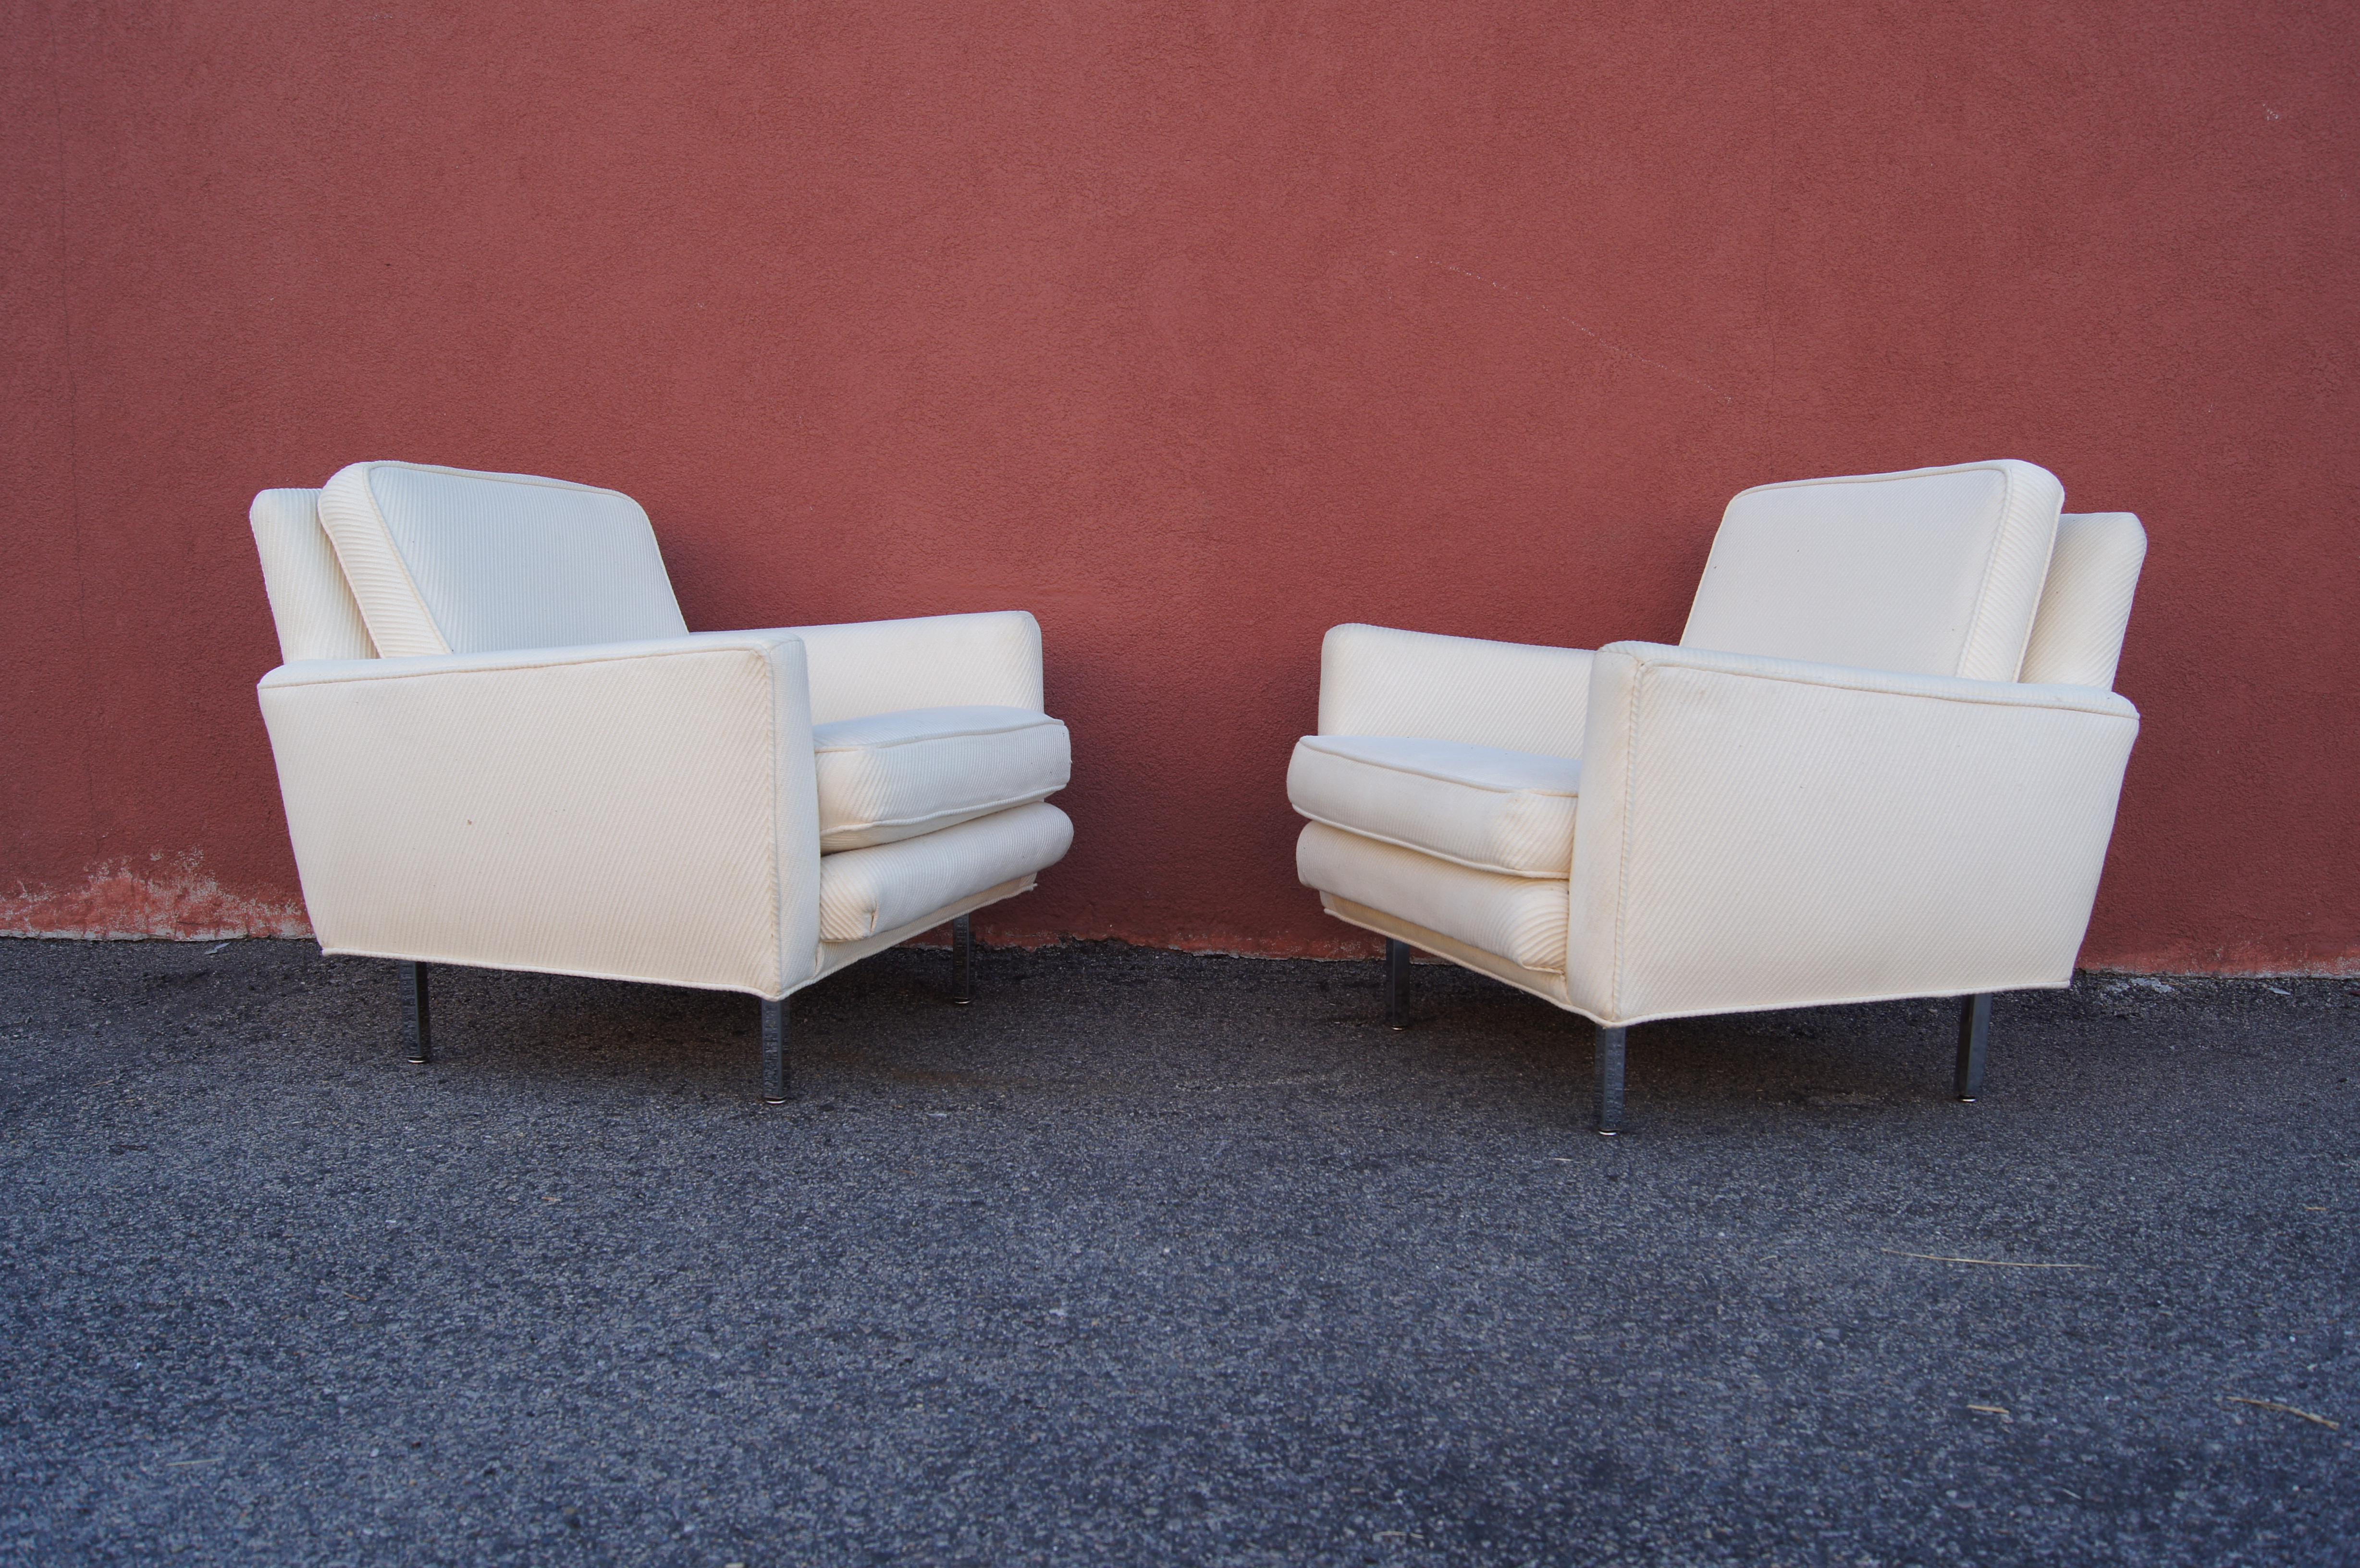 Designed by George Nelson, this pair of clean-lined model 5681 lounge chairs were produced by Herman Miller from 1956 to 1967. Raised on square chrome legs, the upholstered club seat offers deep comfort with a sloped back, high angled arms, and